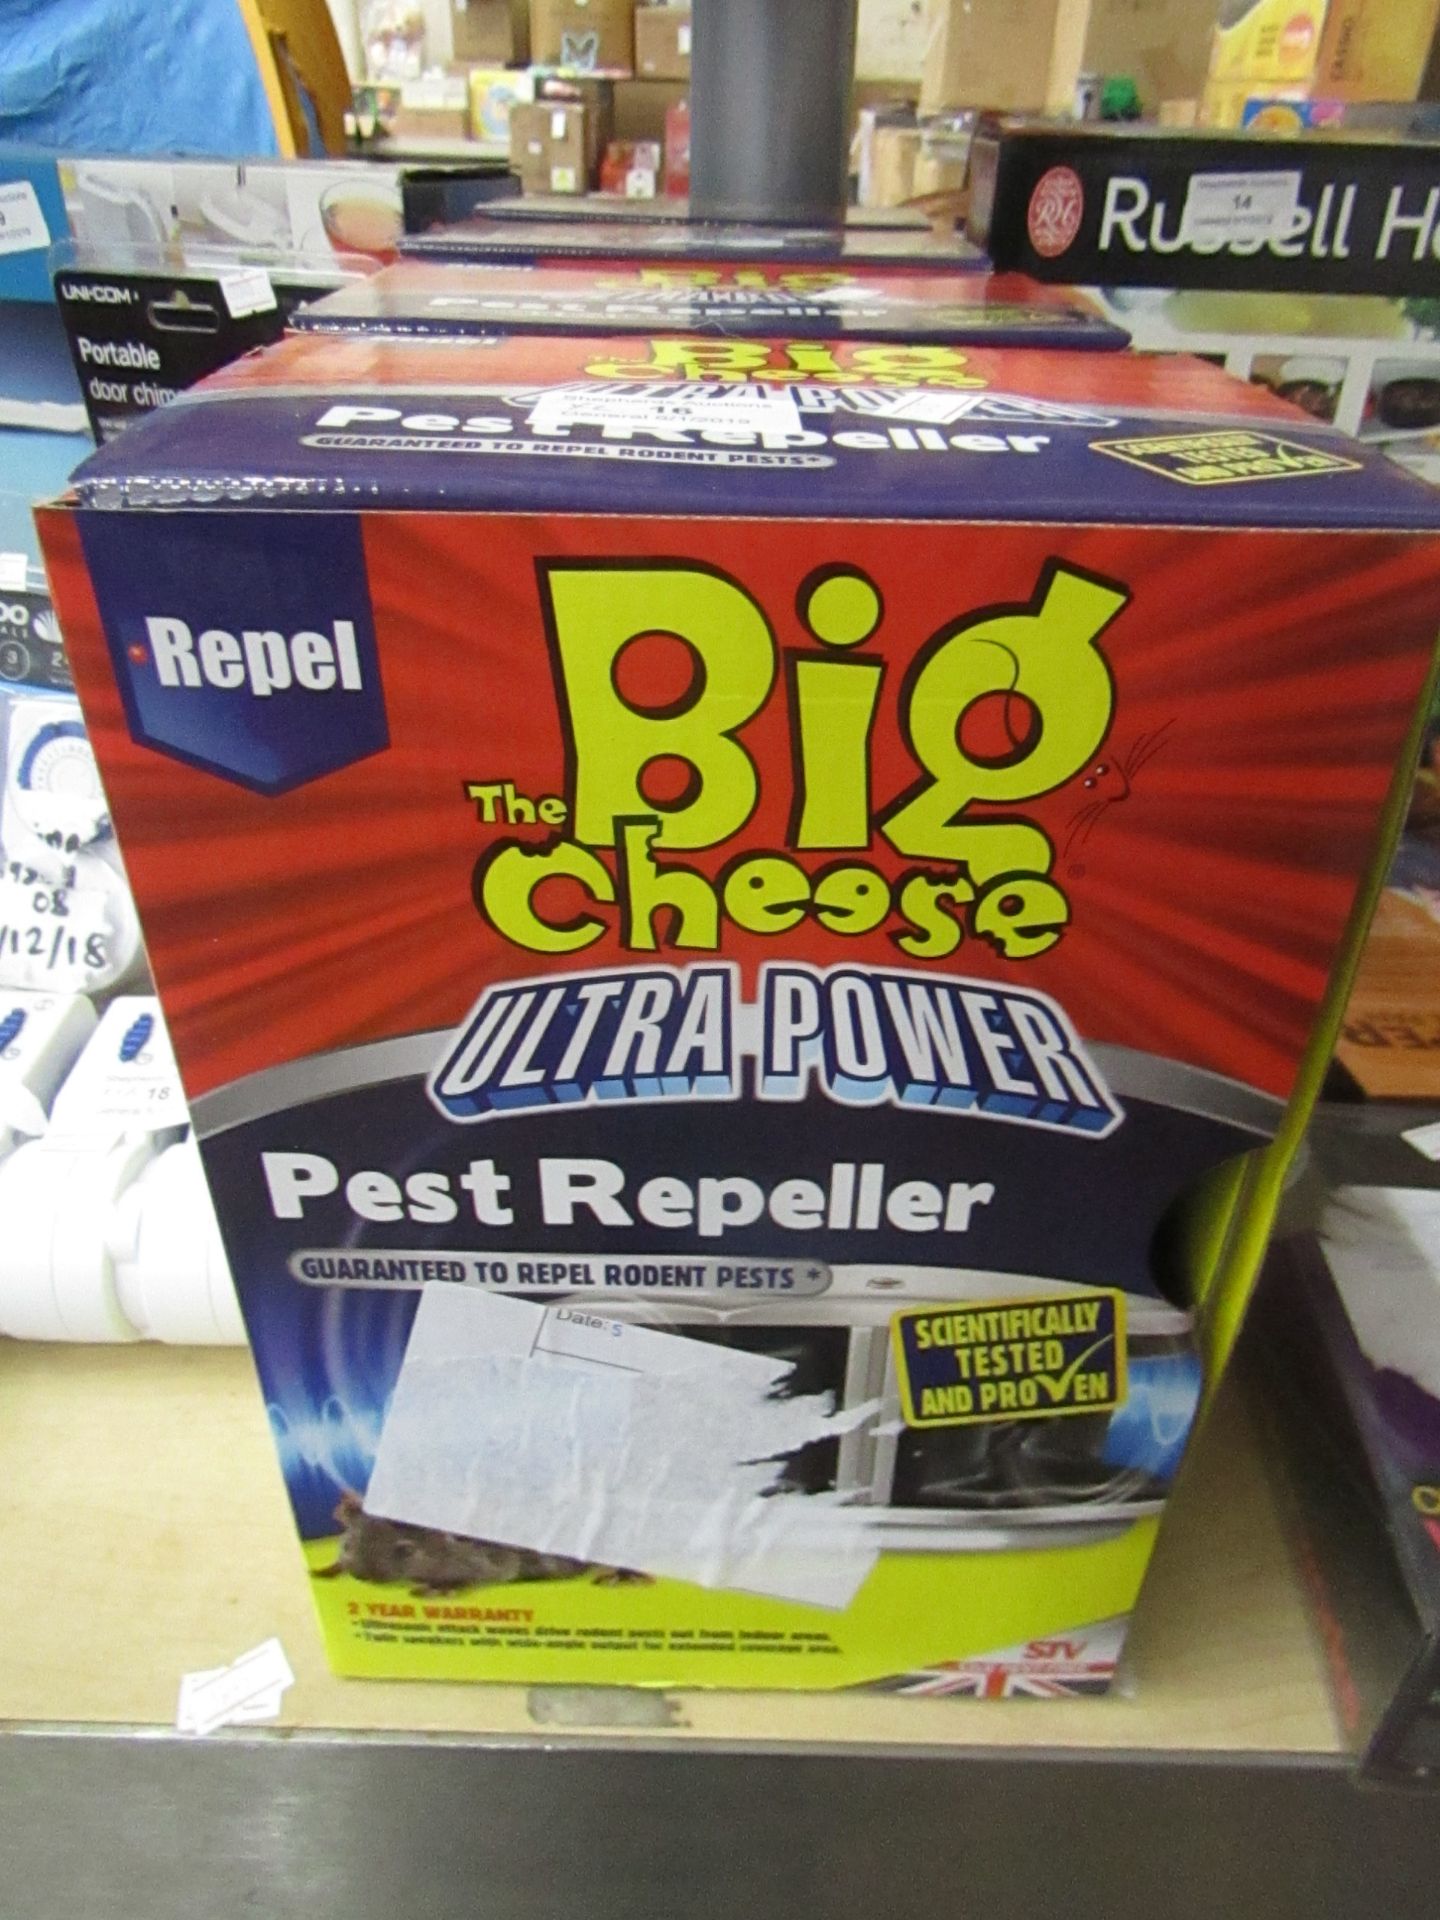 2x Repel the big cheese ultra power pest repellers, both boxed and unchecked